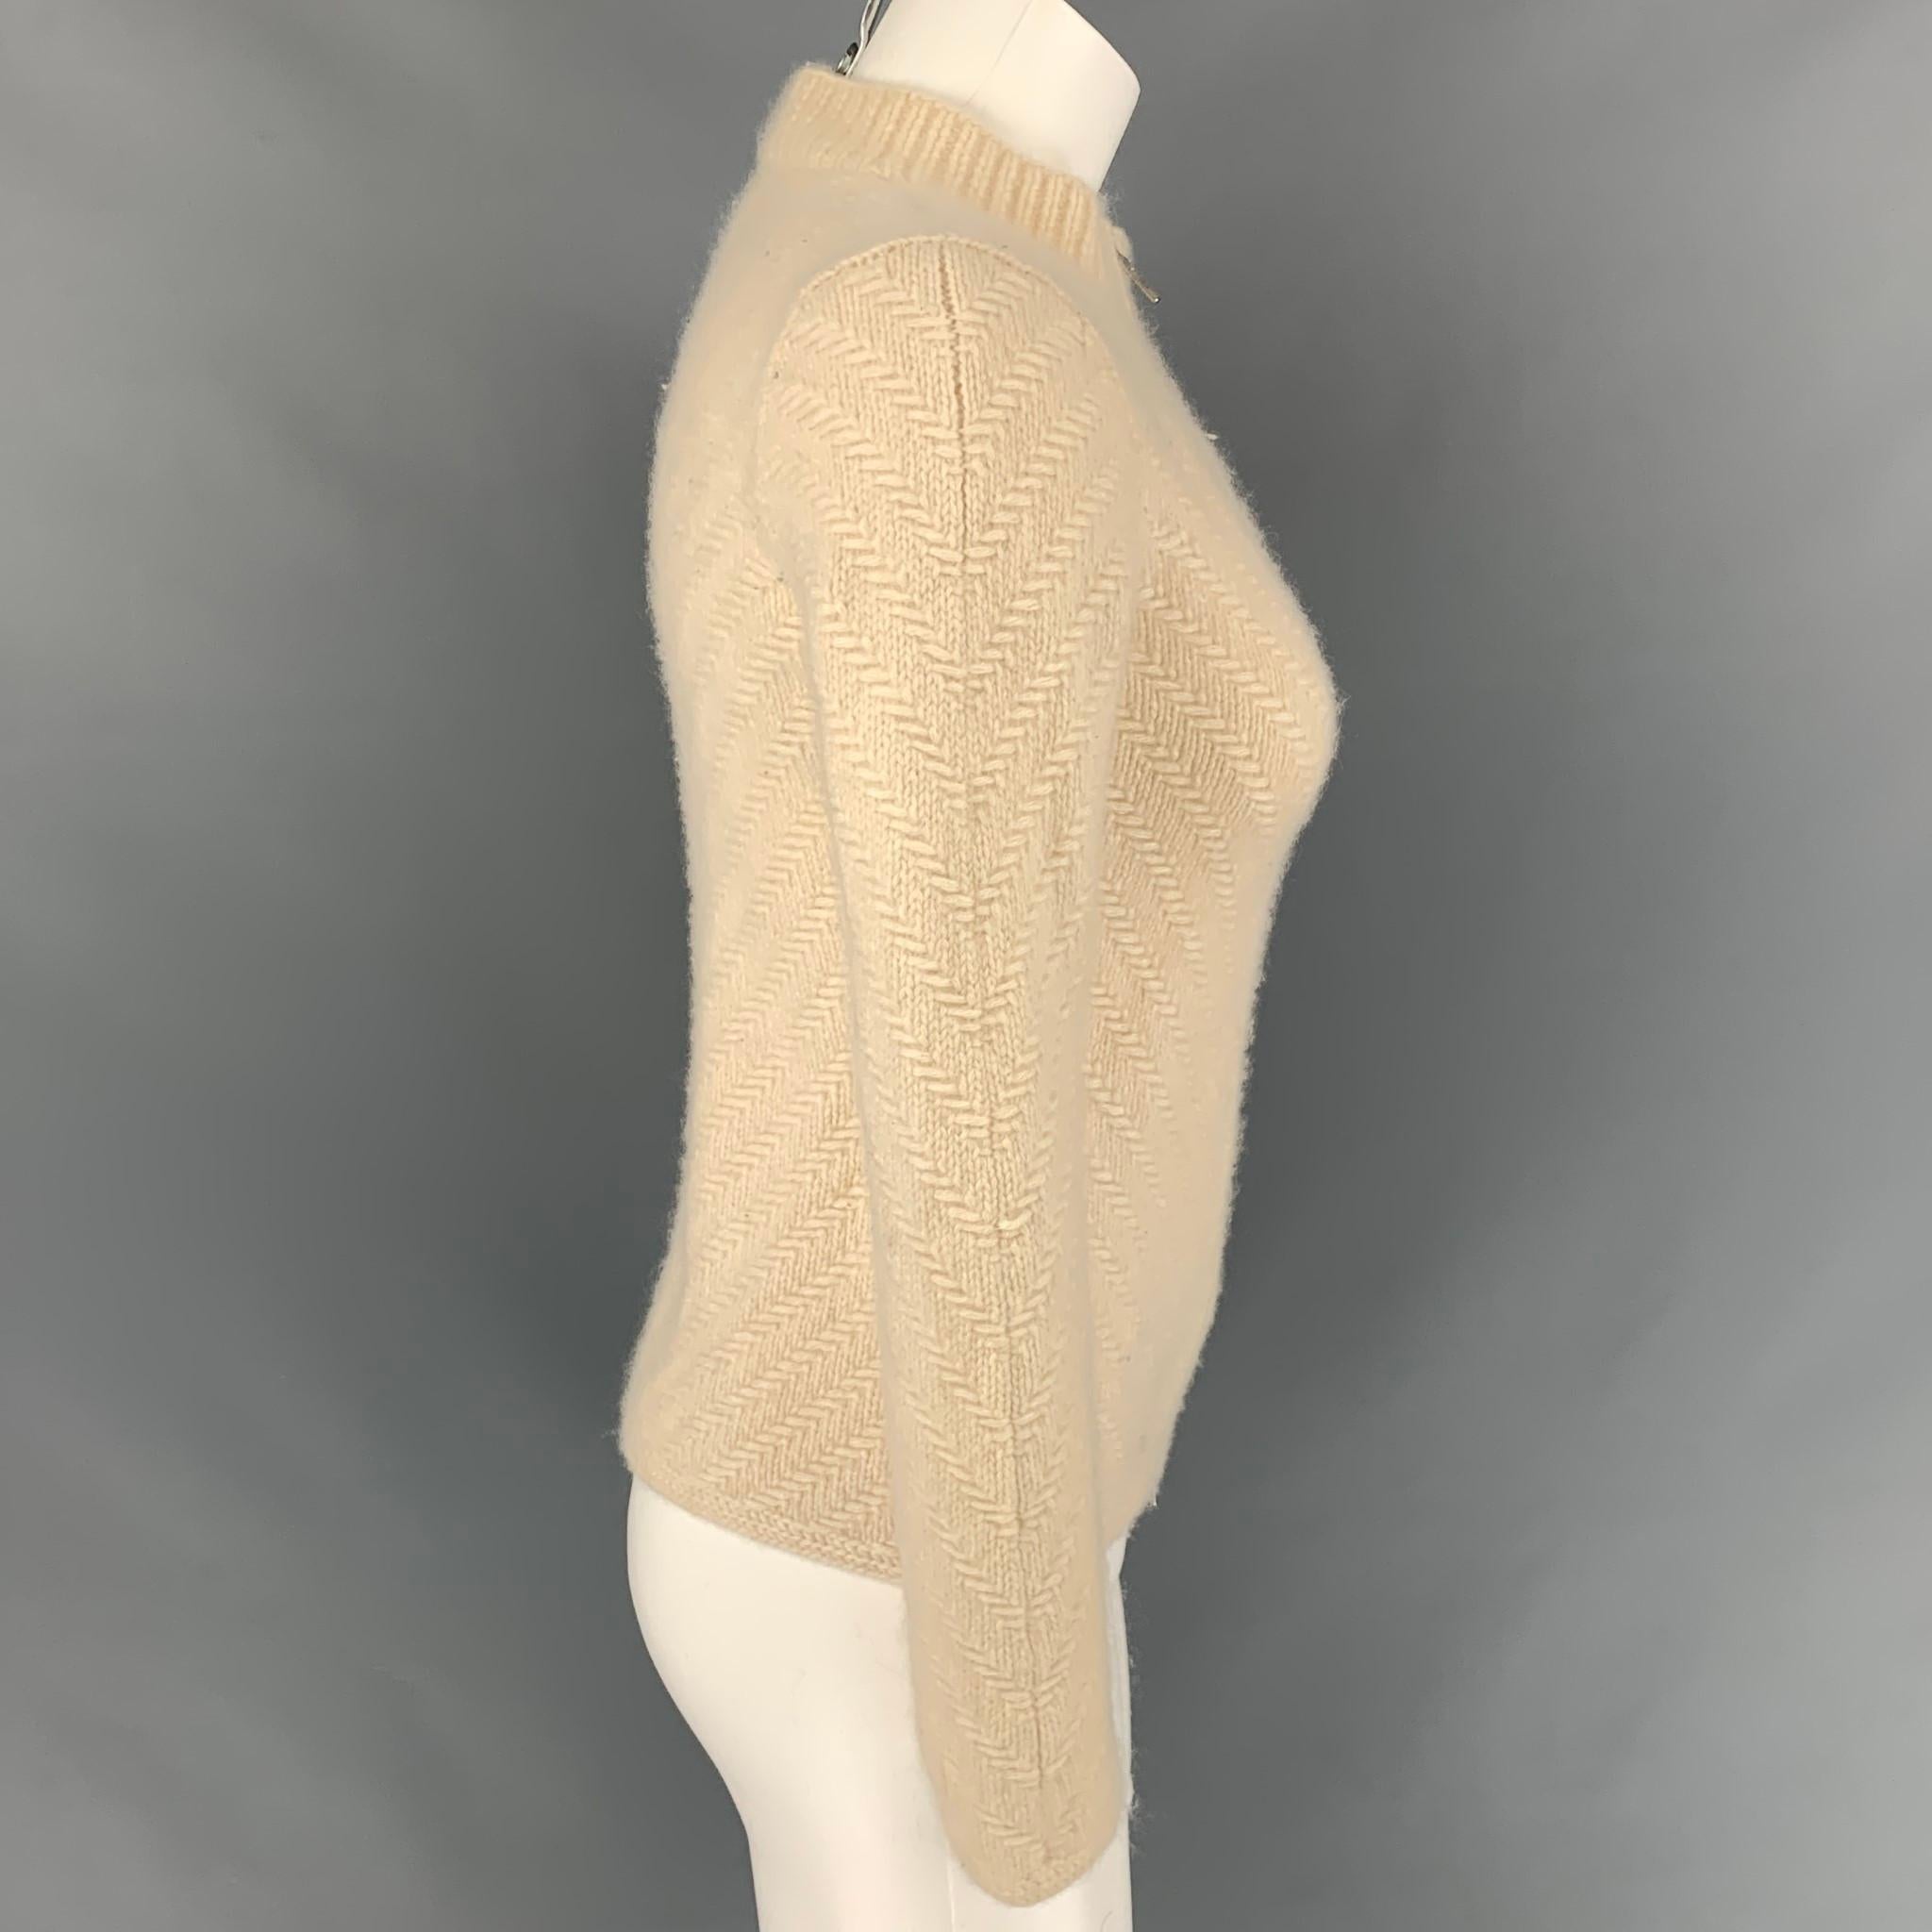 TSE cardigan comes in a cram knitted cashmere featuring a high collar and a zip up closure. 

Very Good Pre-Owned Condition.
Marked: XS
Original Retail Price: $795.00

Measurements:

Shoulder: 15 in.
Bust: 30 in.
Sleeve: 24 in.
Length: 20 in. 